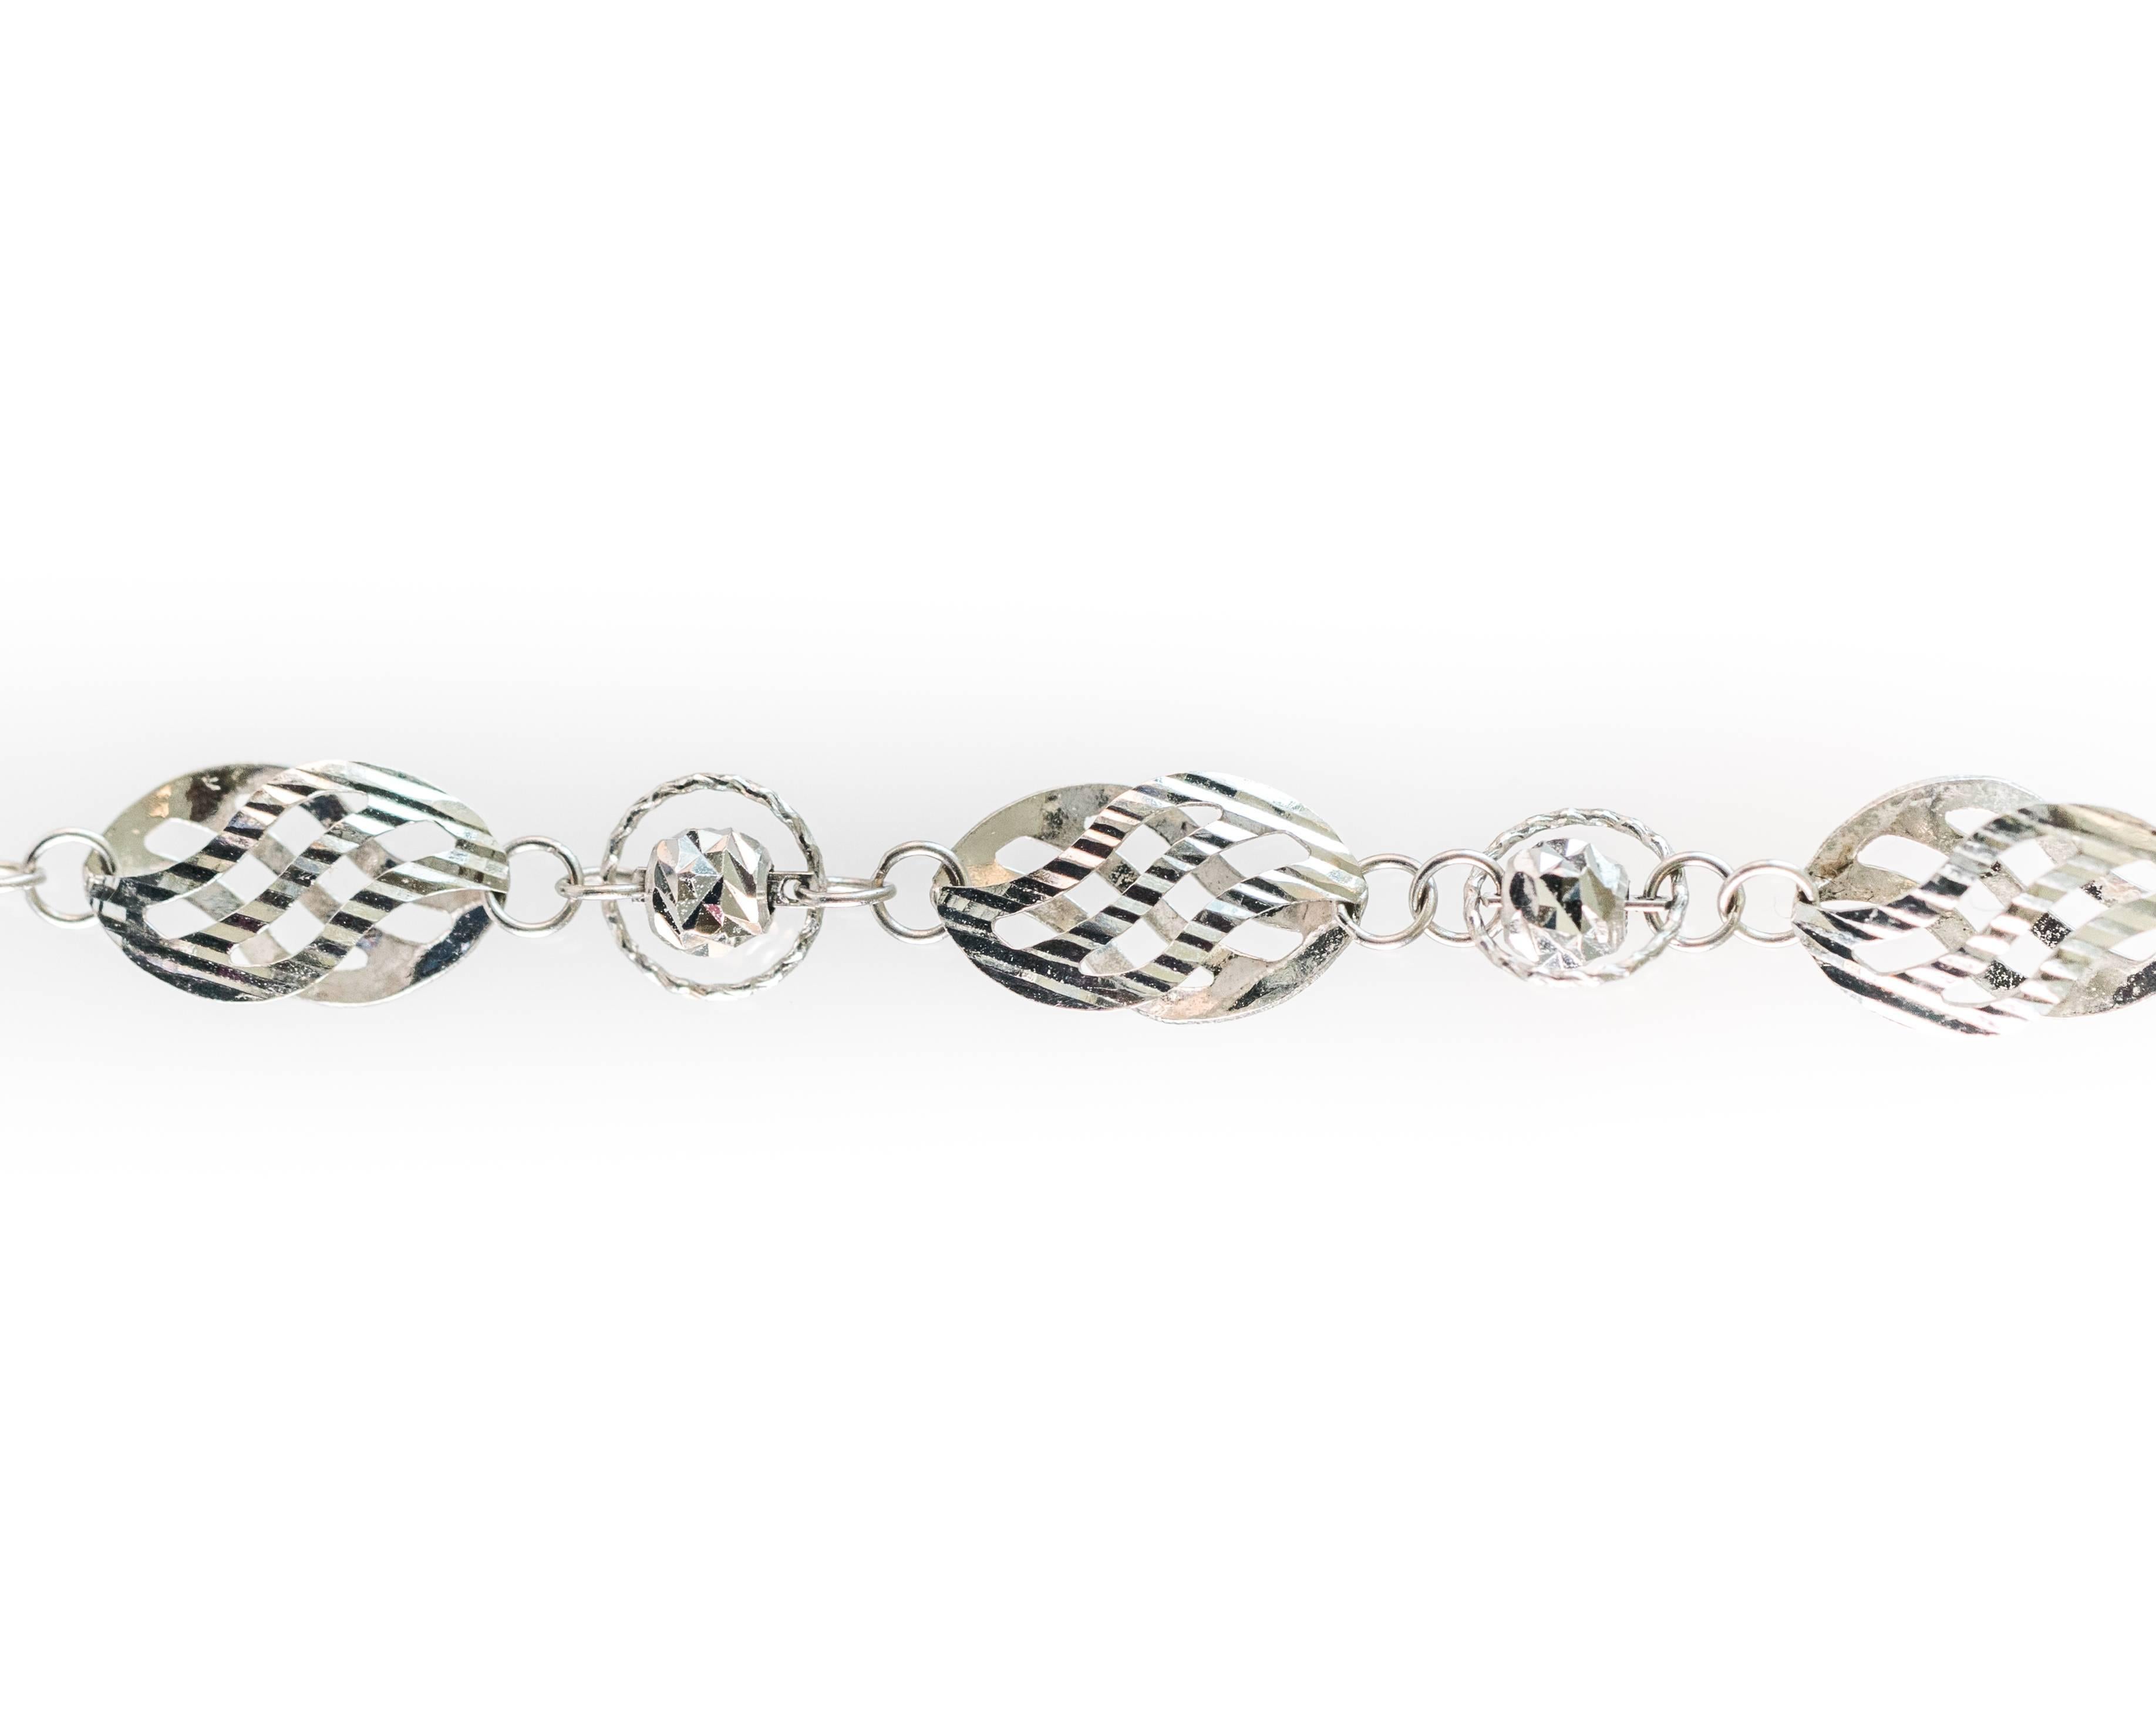 This handmade bracelet from Italy was precision cut by diamond lasers which gives the links a very polished and brilliant look. From a distance, the gold spheres look like diamonds! This bracelet has an alternating pattern of small gold spheres